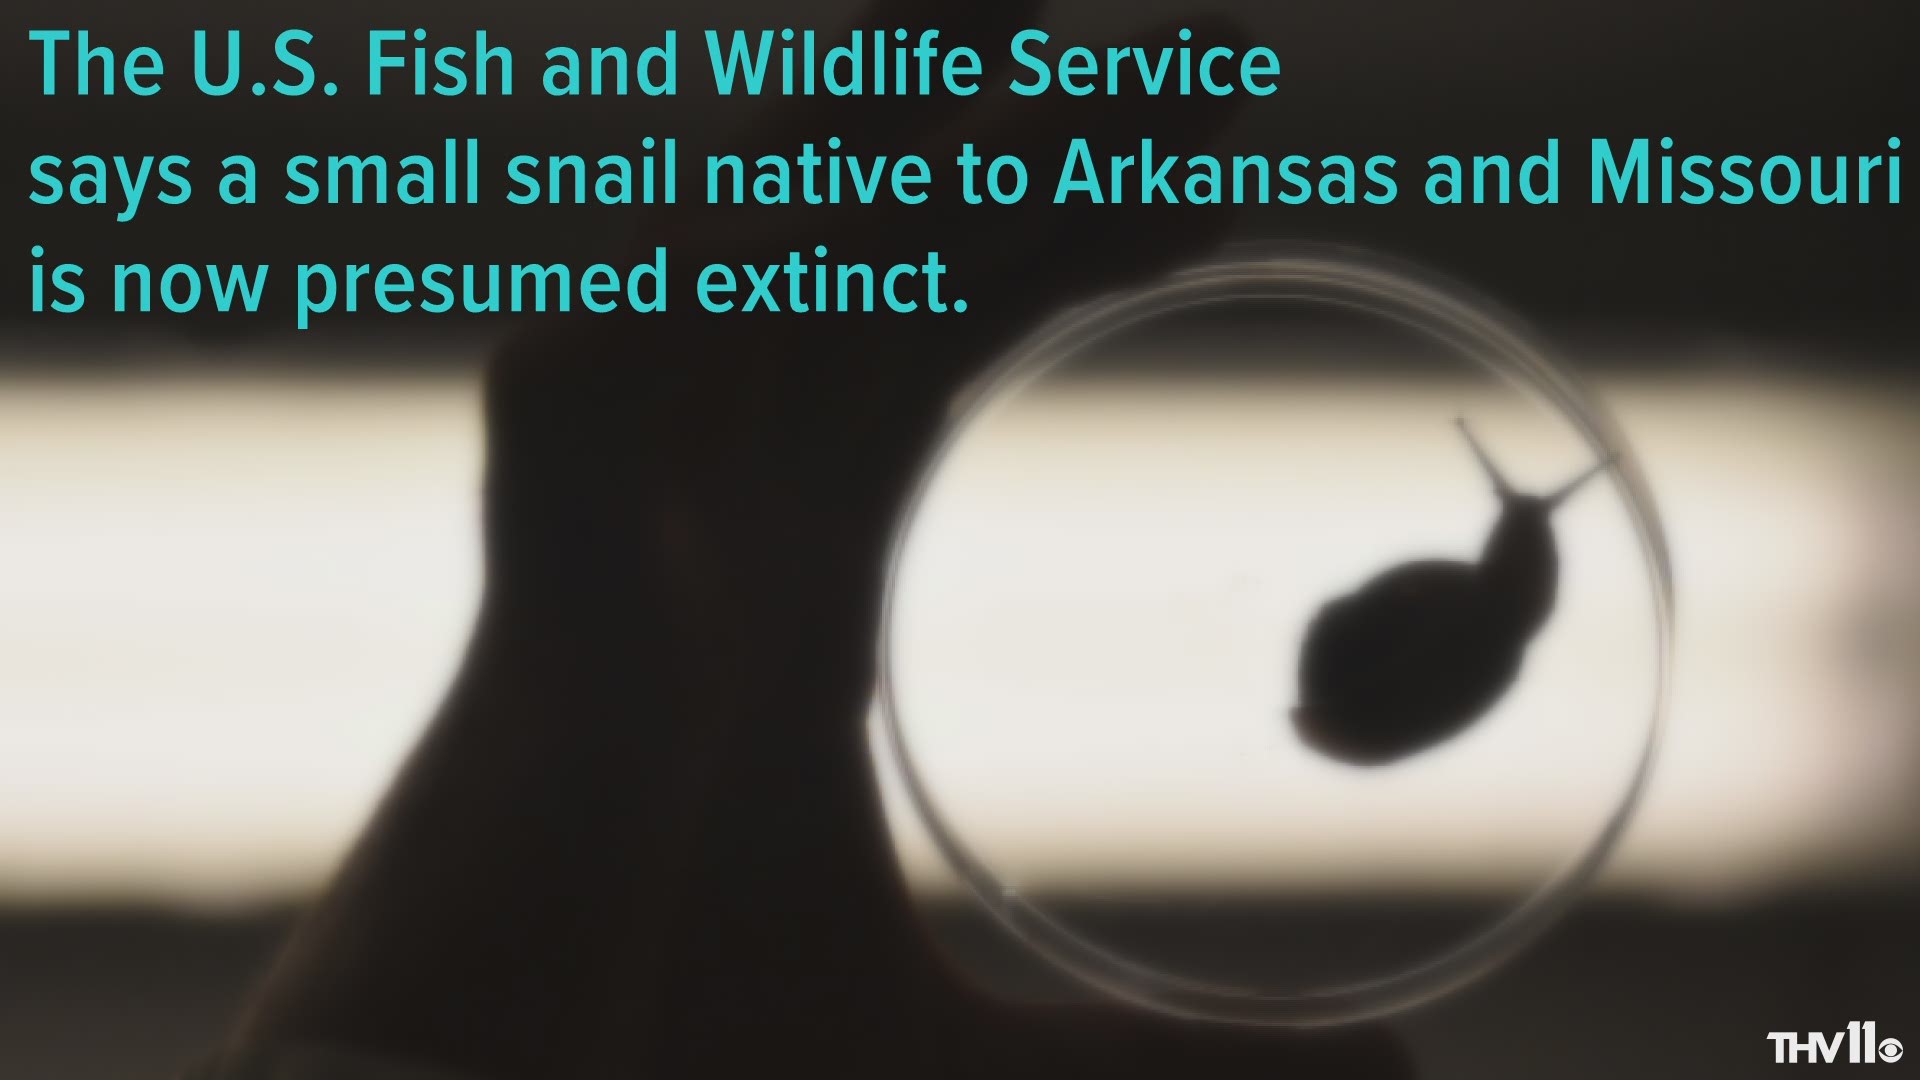 The Ozark pyrg was originally found more than 100 years ago in the White River near Cotter, Arkansas, and in the North Fork White River near Norfork, Arkansas, extending into Missouri. But officials say the snail hasn't been confirmed in surveys since 1915.